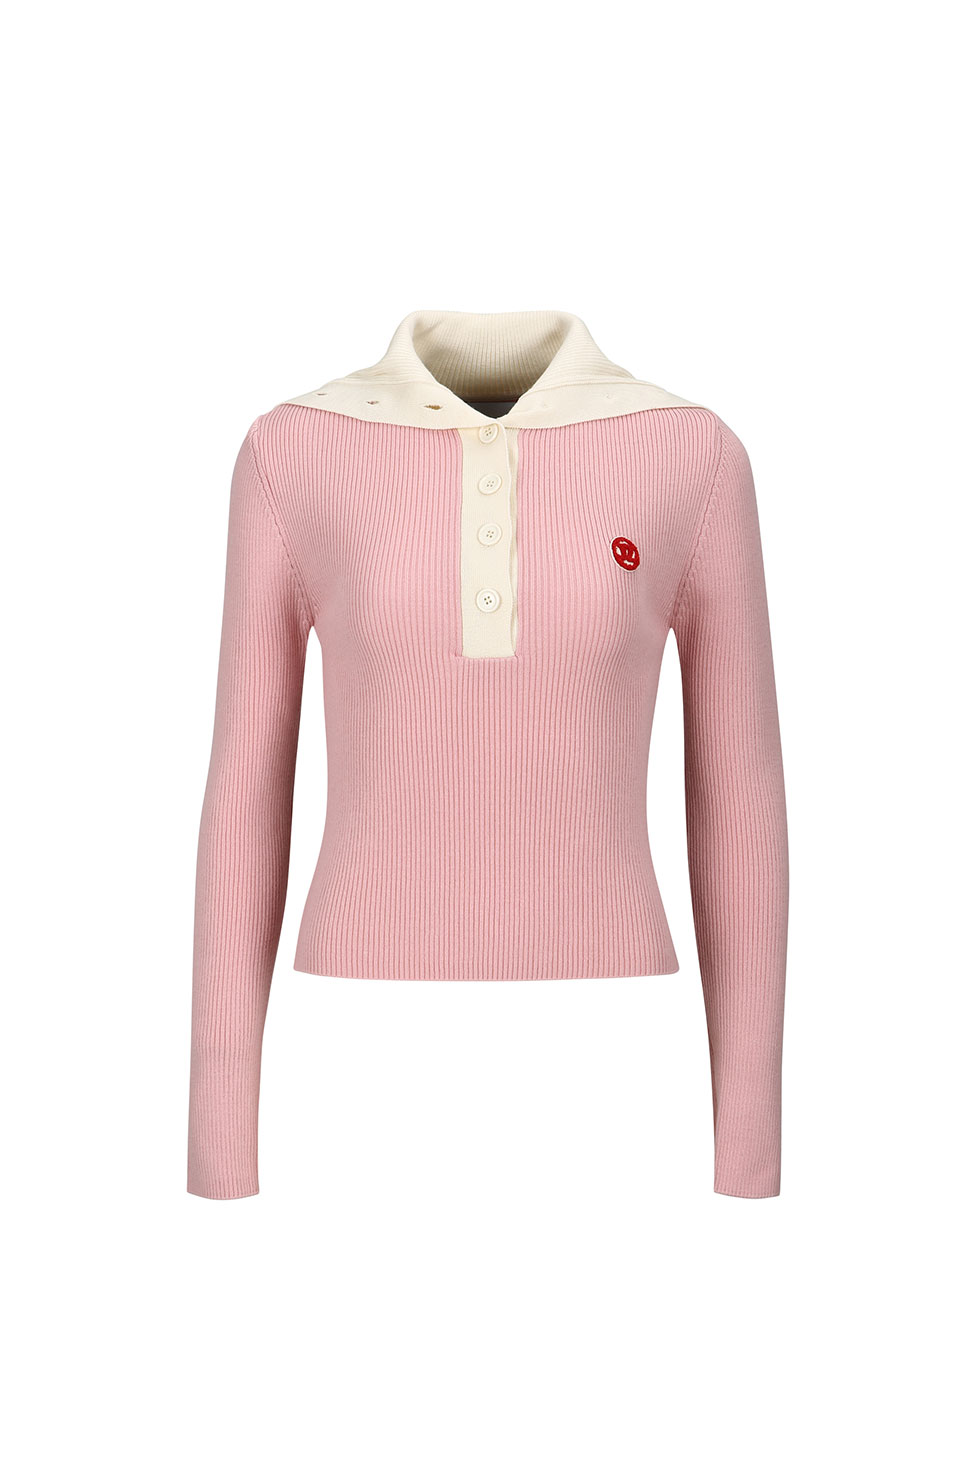 CONTRASTED NECK COLLAR KNIT TOP - PINK